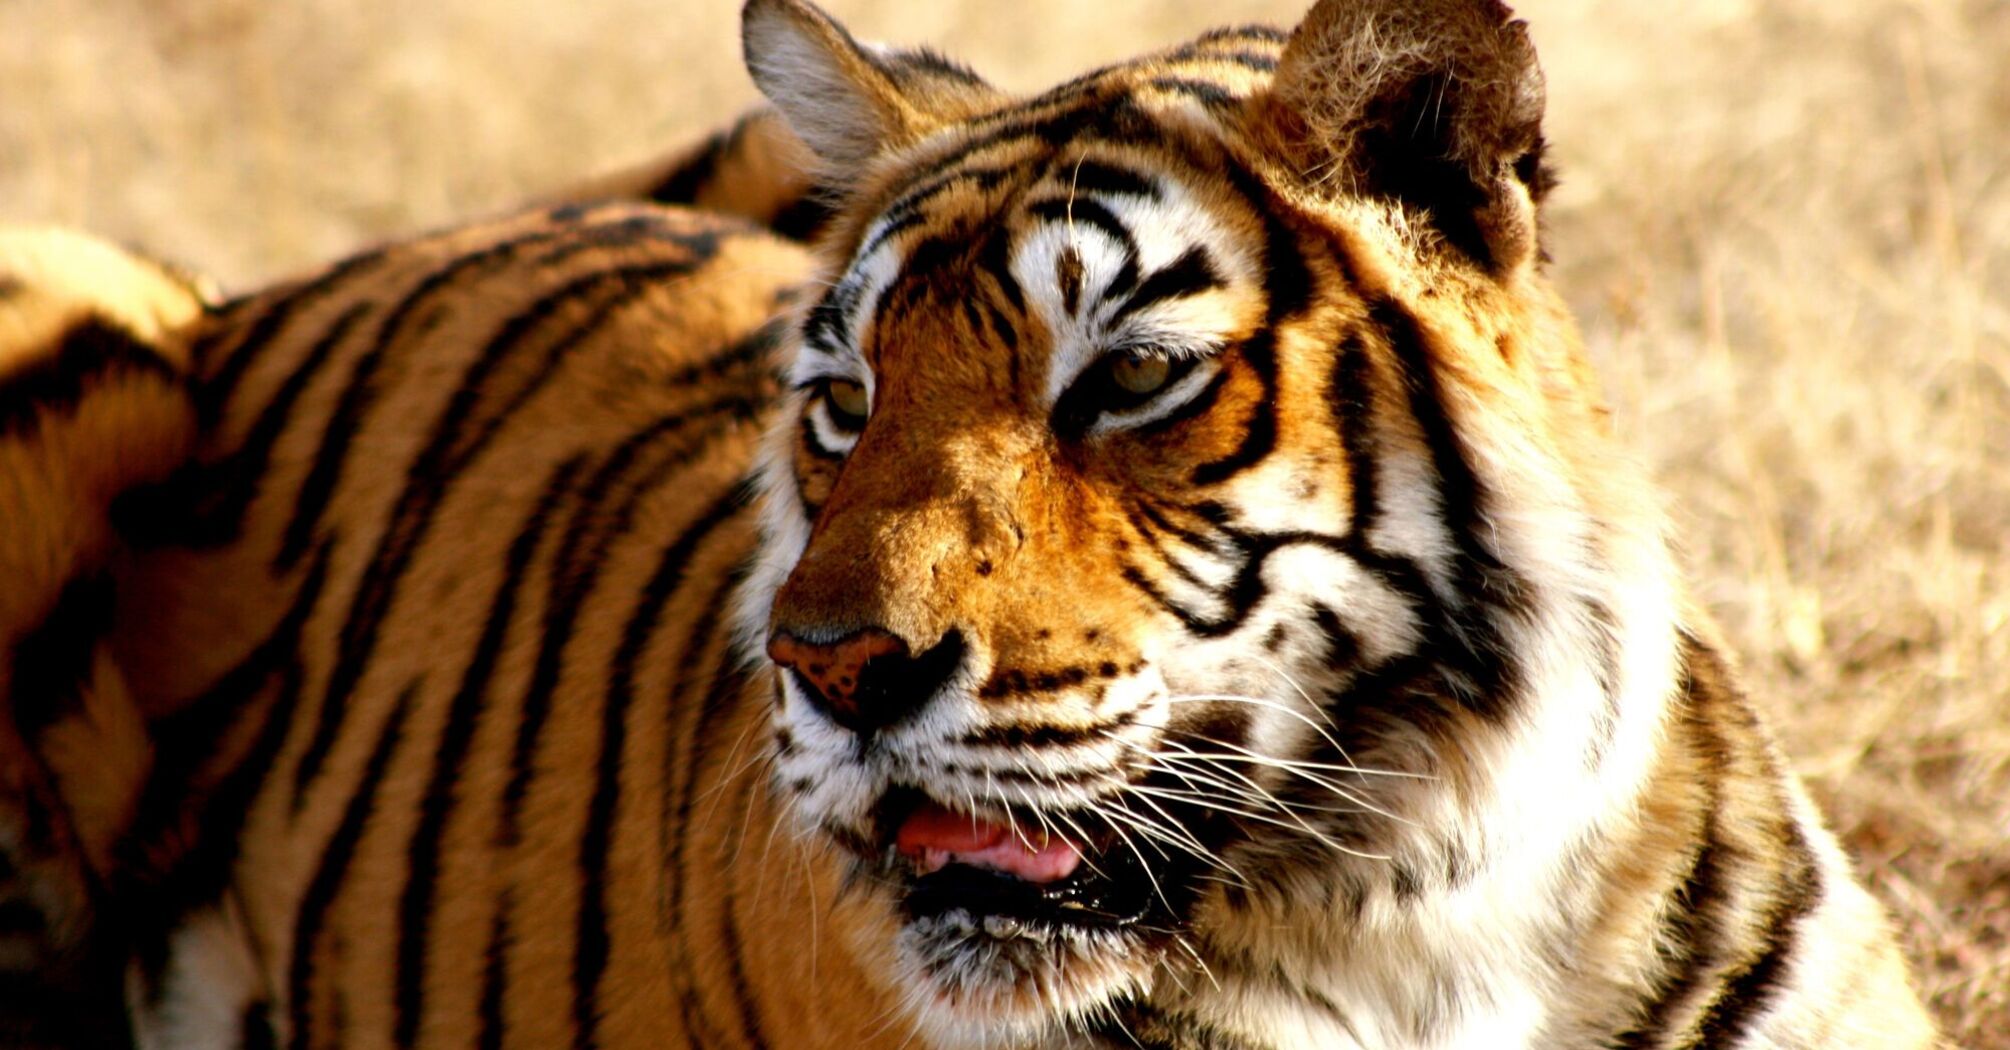 A Bengal tiger with prominent black stripes on its orange fur, resting and looking to the side